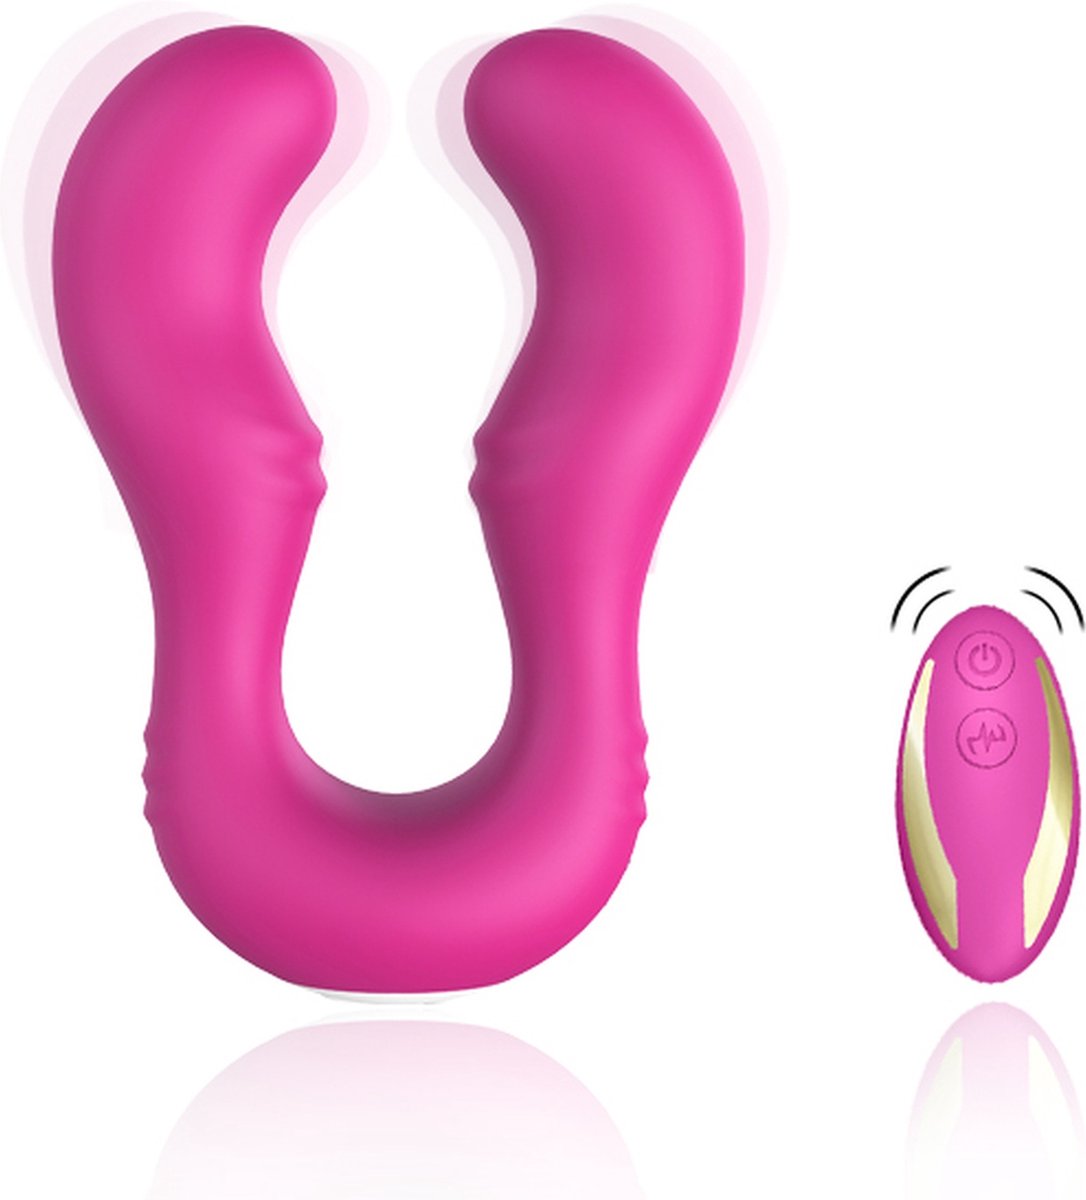 Bossoftoys - Koppel Vibrator Seraph rose red with remote